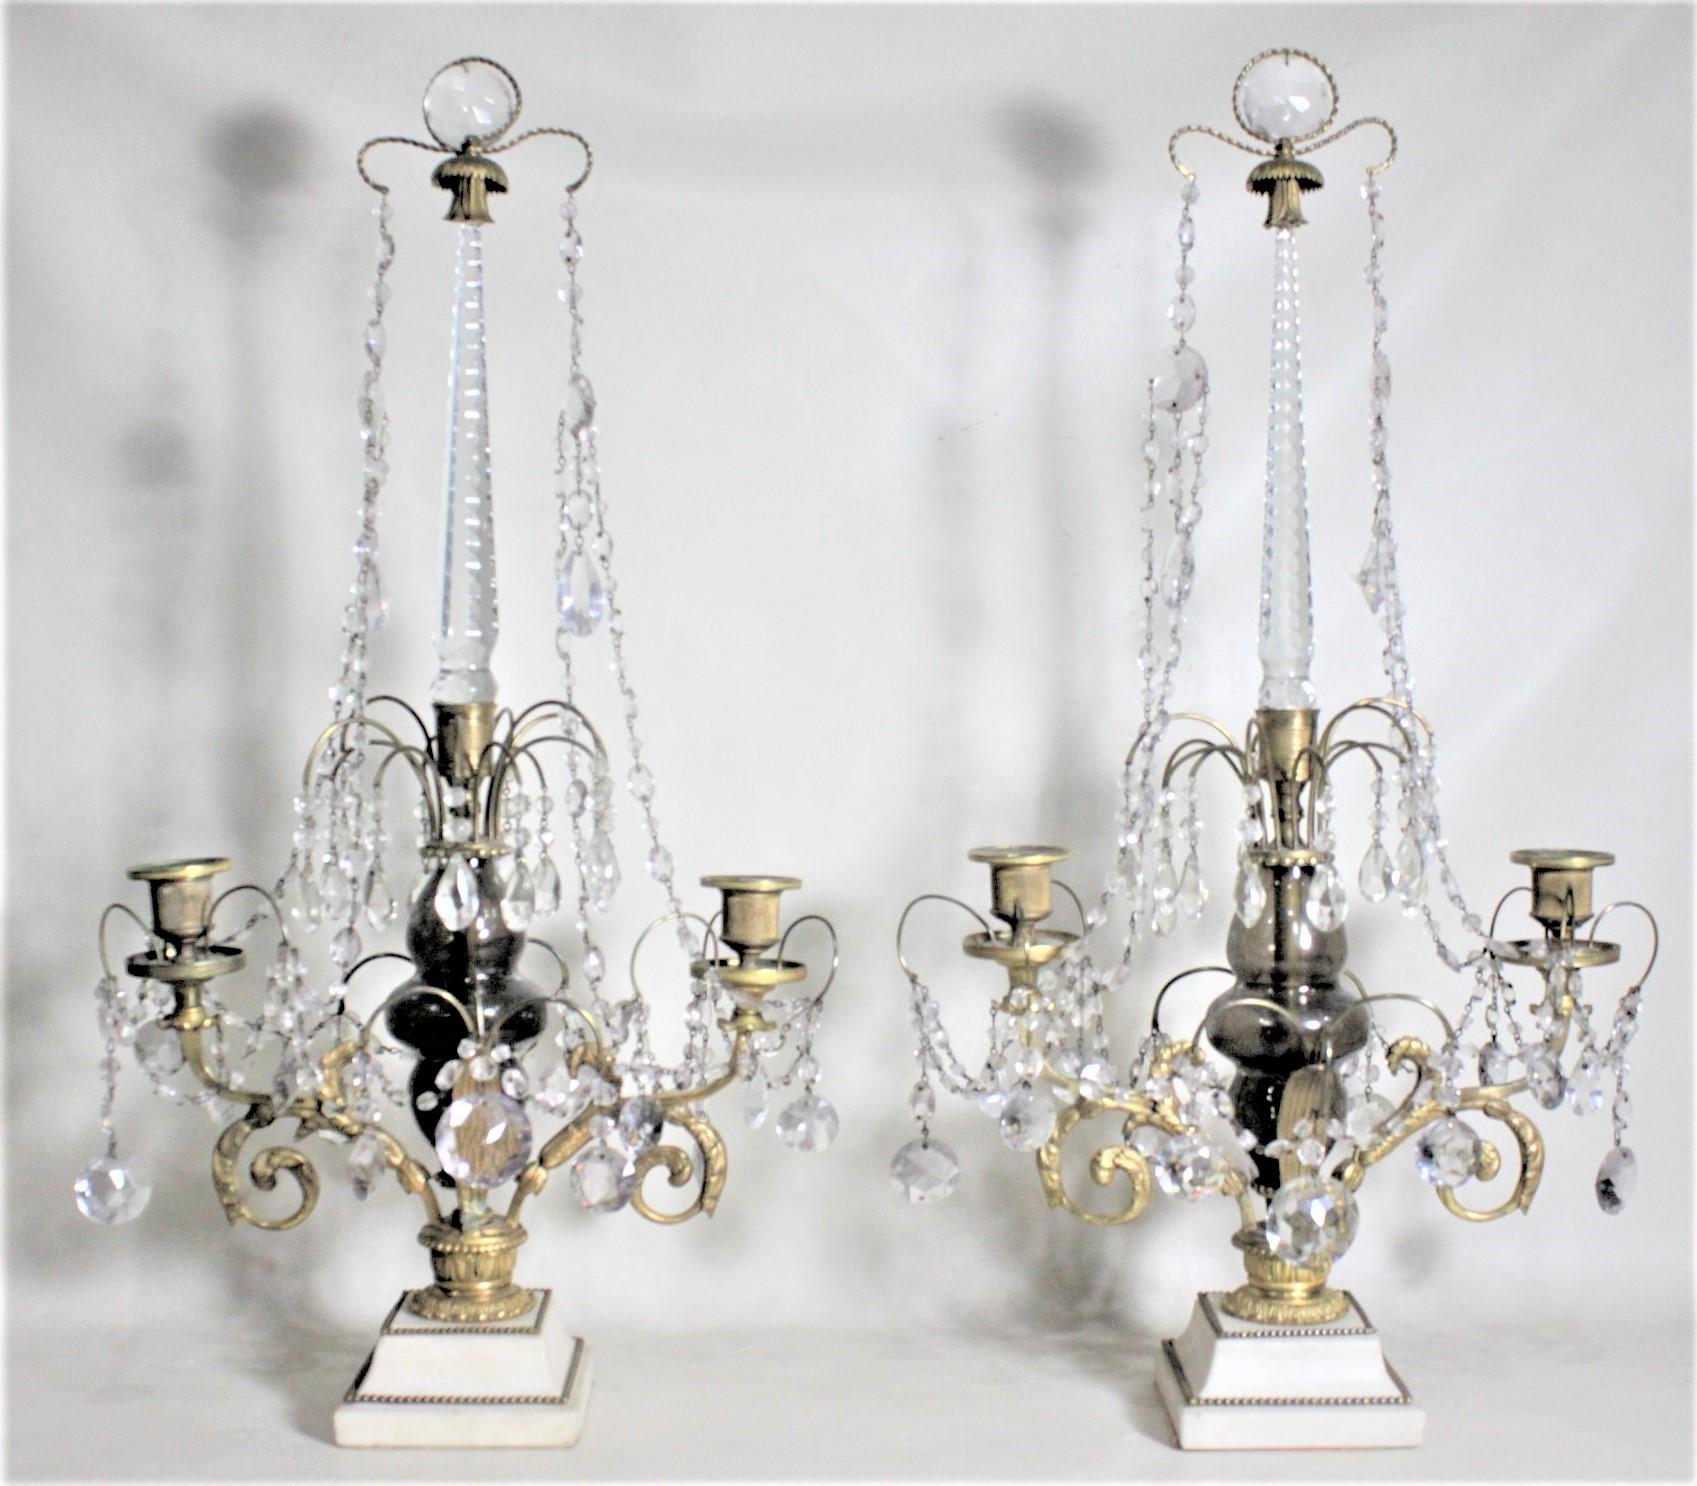 This pair of quite large and substantial antique bronze and crystal candelabras show no maker's marks, but are presumed to have been made in France in circa 1920 in the Renaissance style. Each candelabra has nicely executed cast and gilt bronze arms